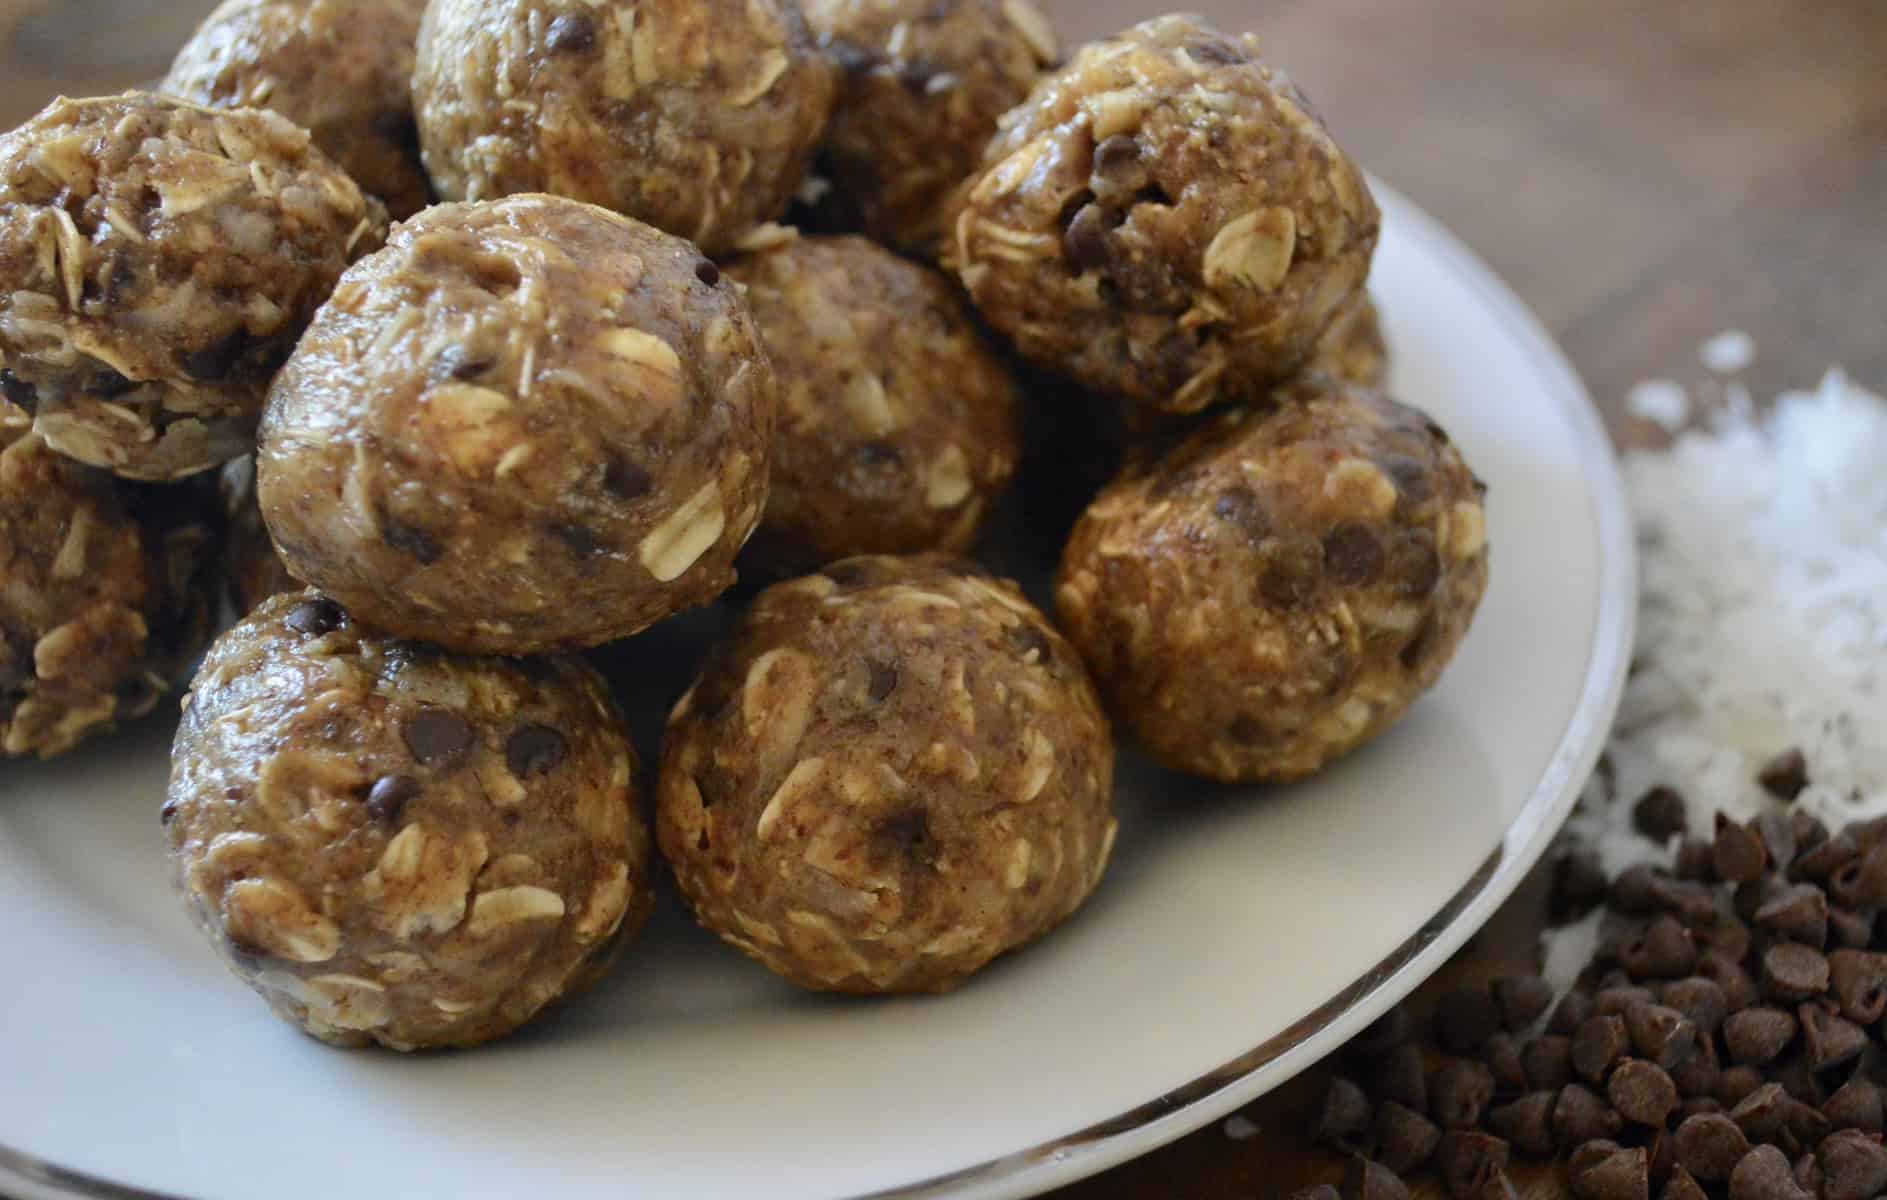 Chocolate Coconut Energy Bite Balls are a simple and no bake treat that is perfect for after school snack or a lunchtime treat. Best Brunch Recipes. Made with oatmeal, flaxseed, honey, cinnamon, peanut butter, mini chocolate chips, and coconut, they are delicious and taste like an Almond Joy! #nobake #energyballs #energybites #coconut #afterschool #snack #kidsrecipe #kidssnack #healthysnack #proteinsnack